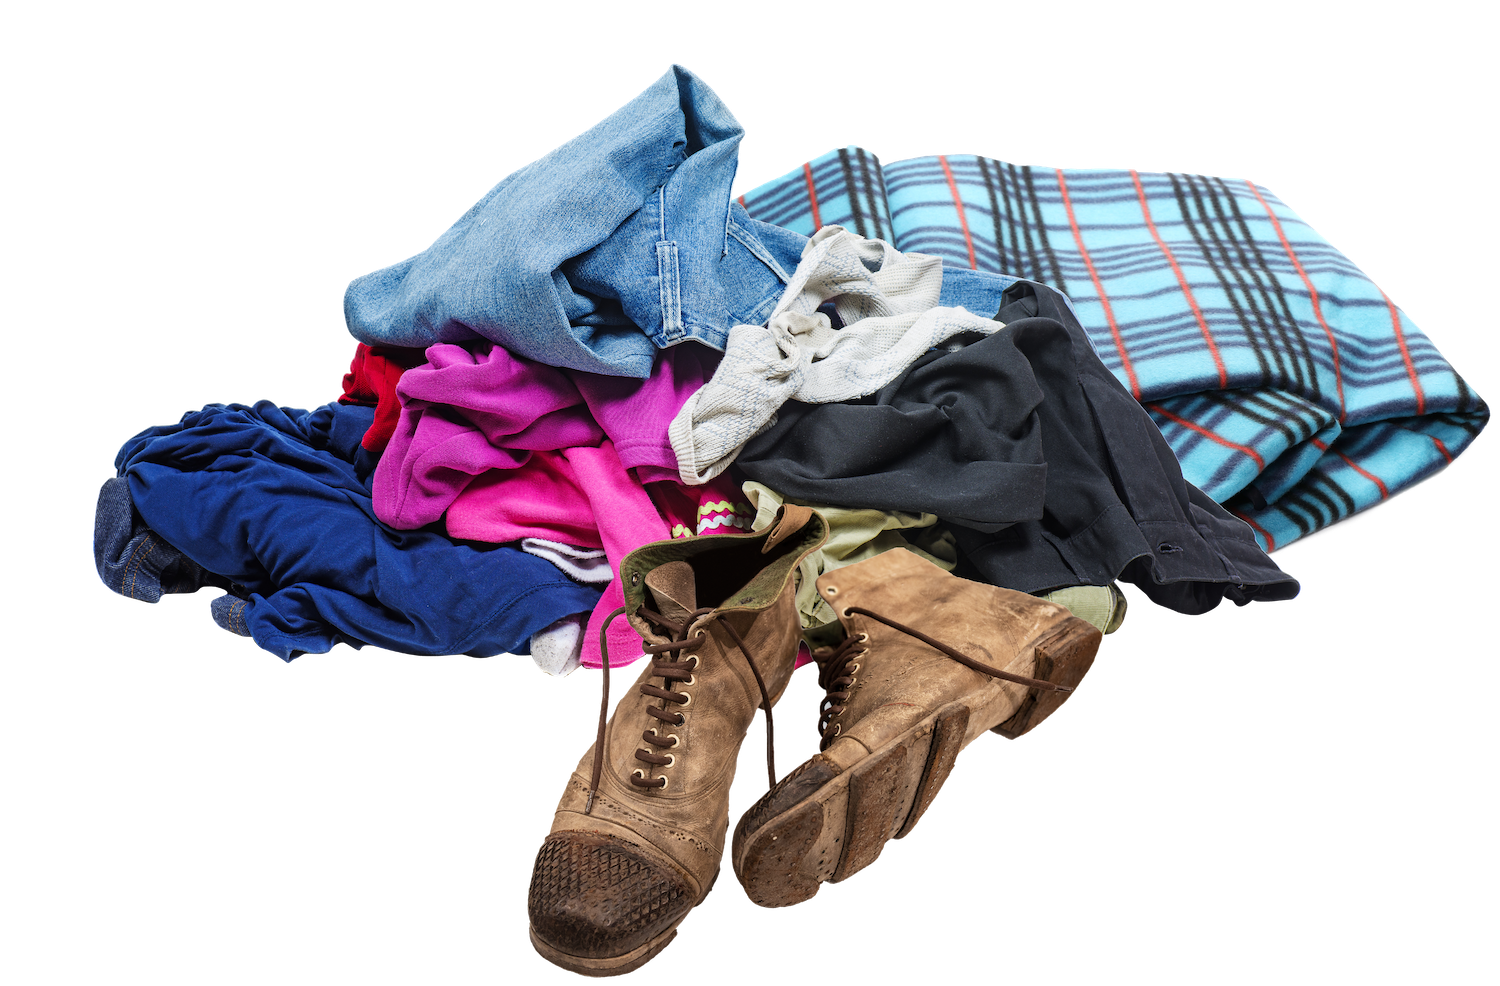 Clothes, shoes, blankets image